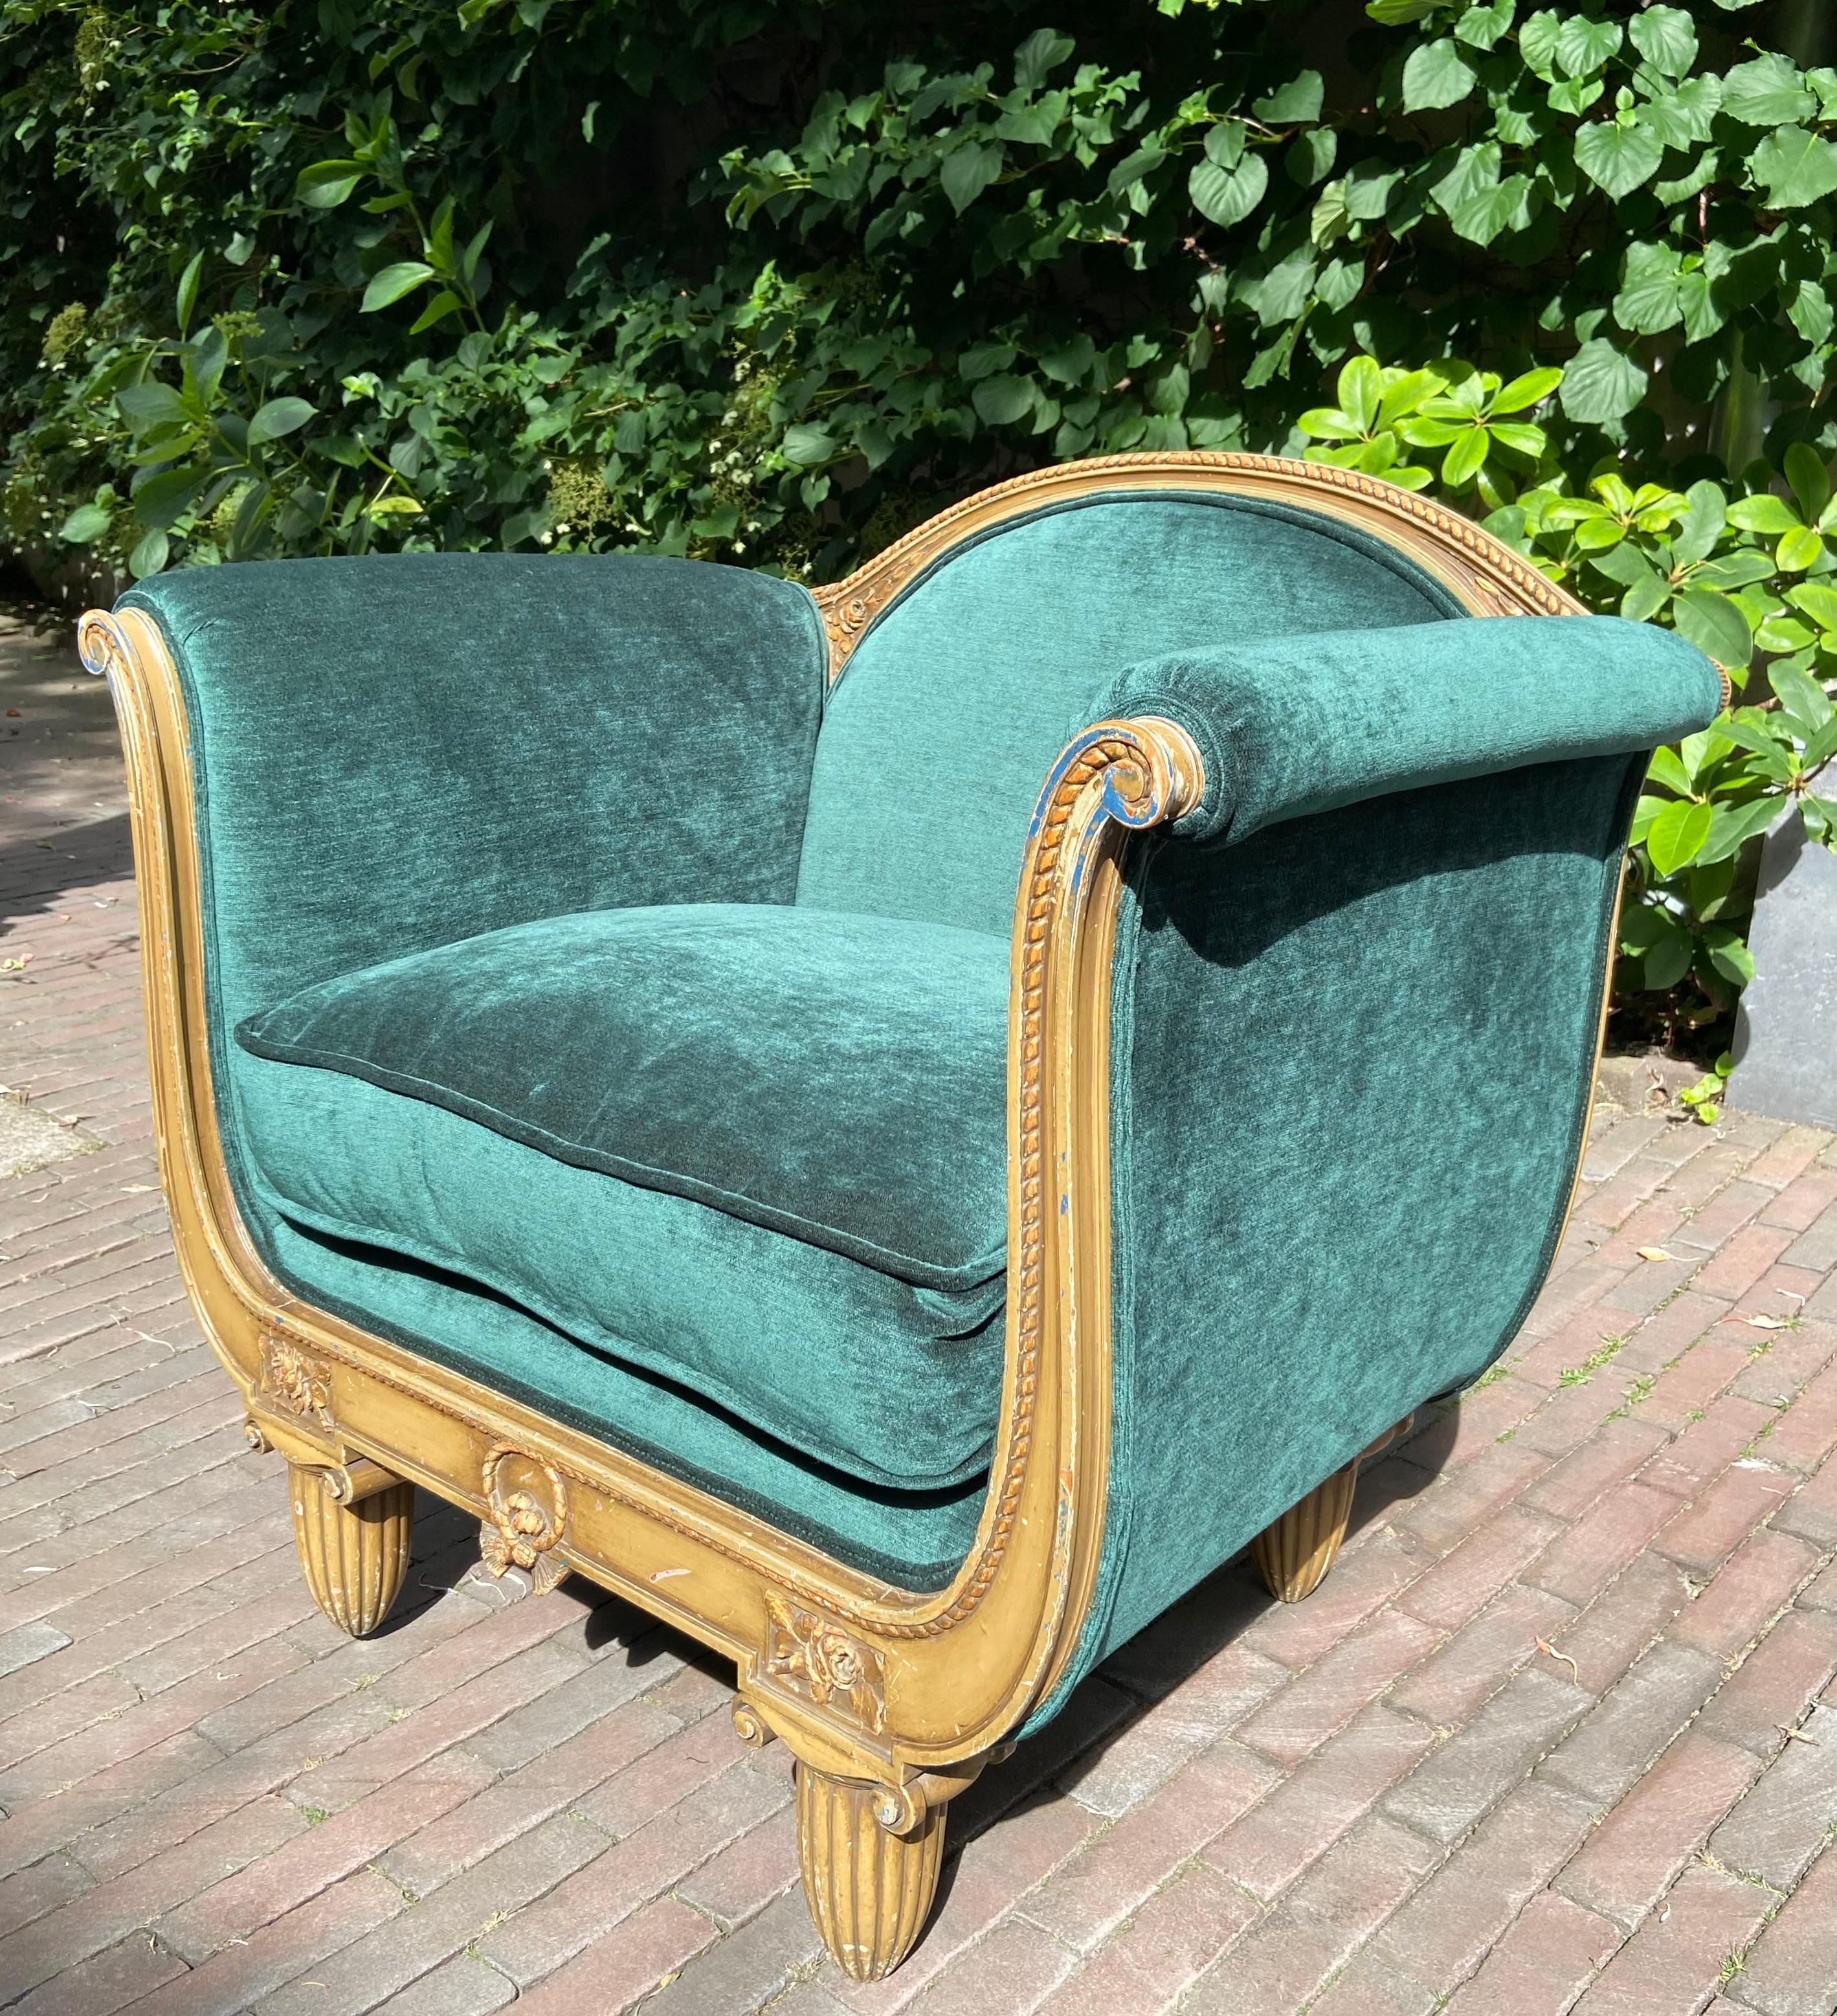 Art Deco (lady's) armchair, France, circa 1925.
The chair is reupholstered recently with a new interior and pilot.
Fabric: Güell-Lamadrid. 